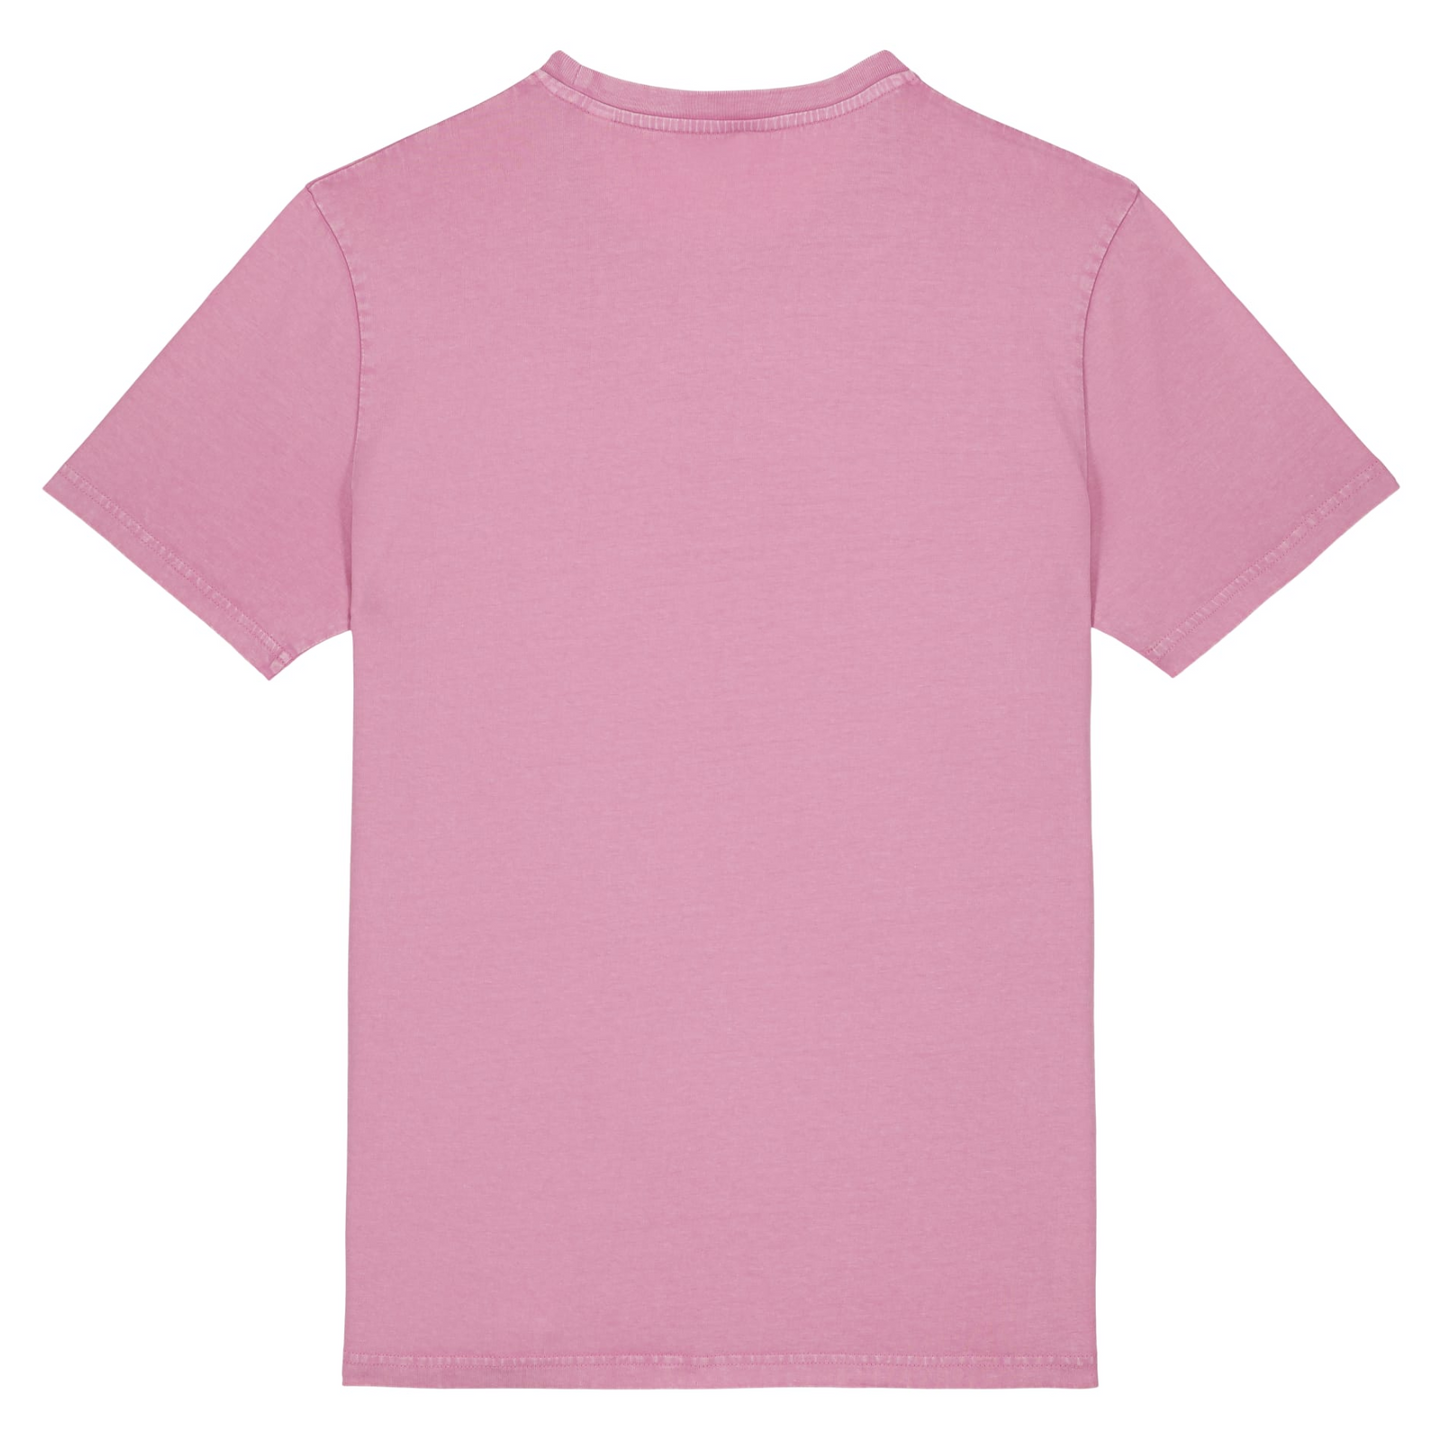 The back of a plain pink t-shirt